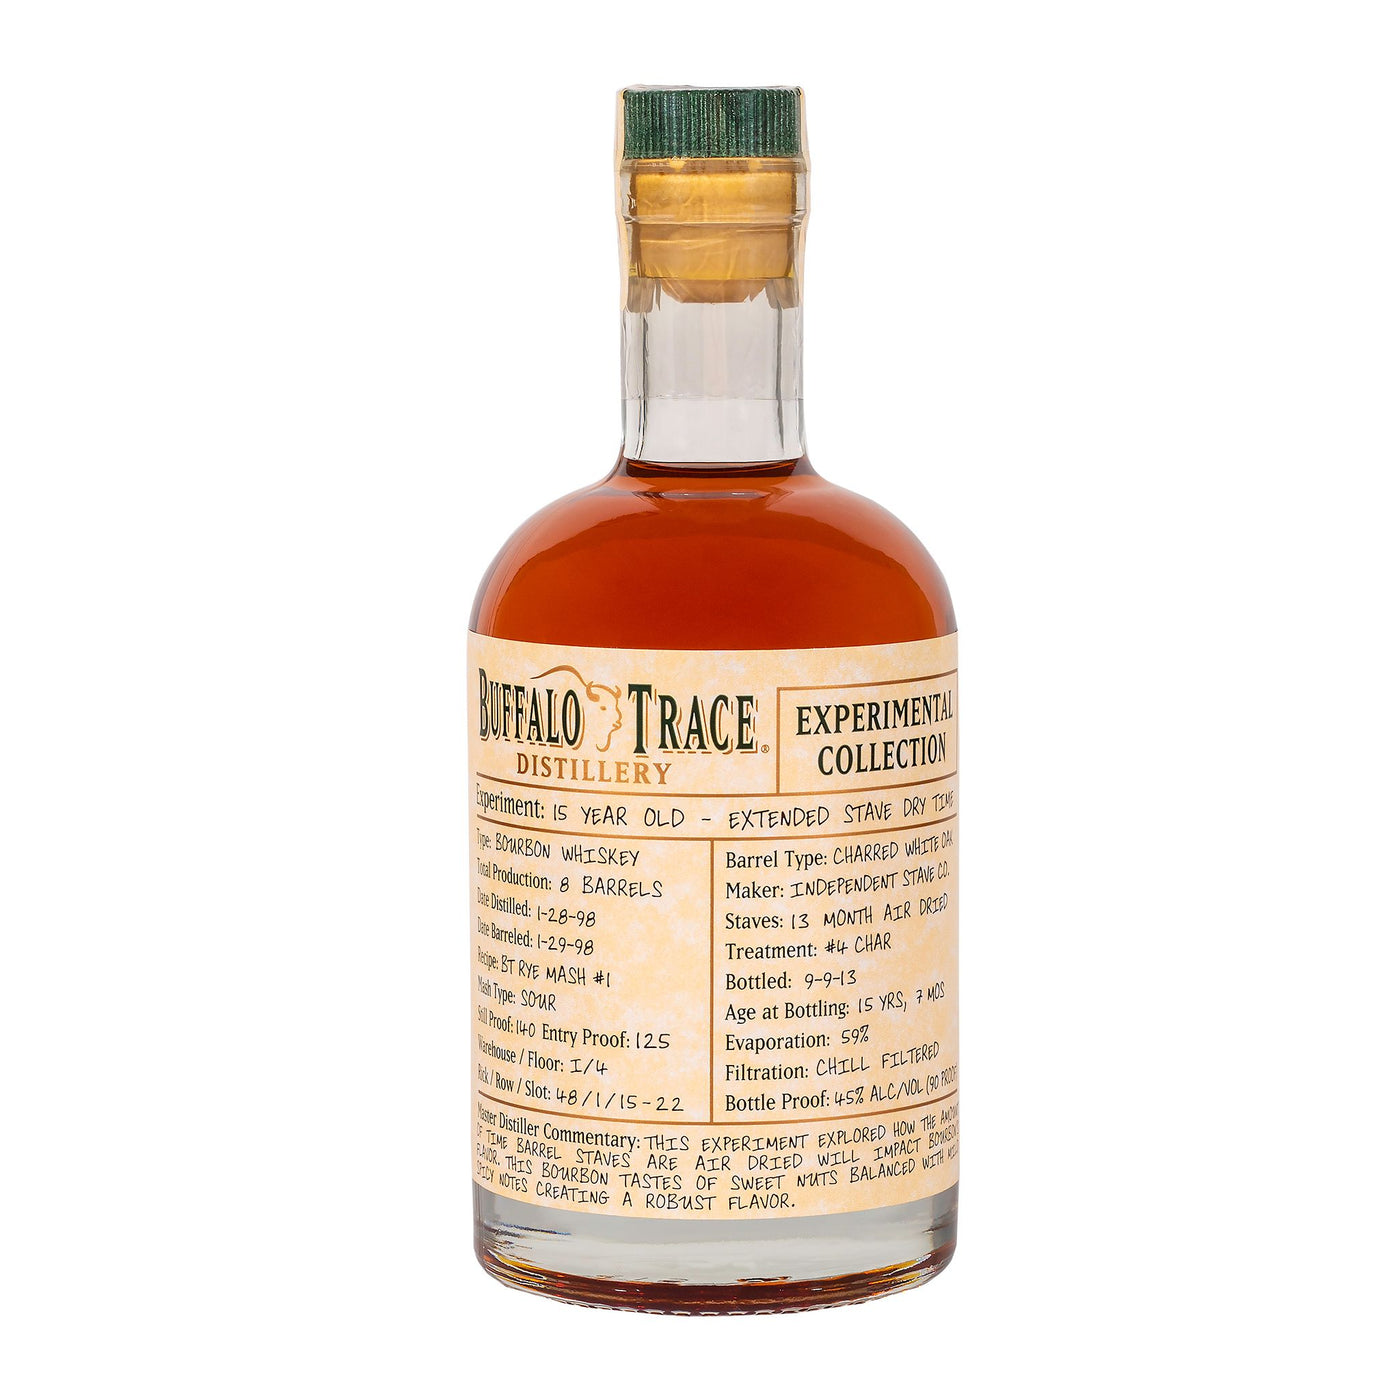 Buffalo Trace Experimental Collection | 15 Year - Extended Stave Time (1 of 2) at CaskCartel.com